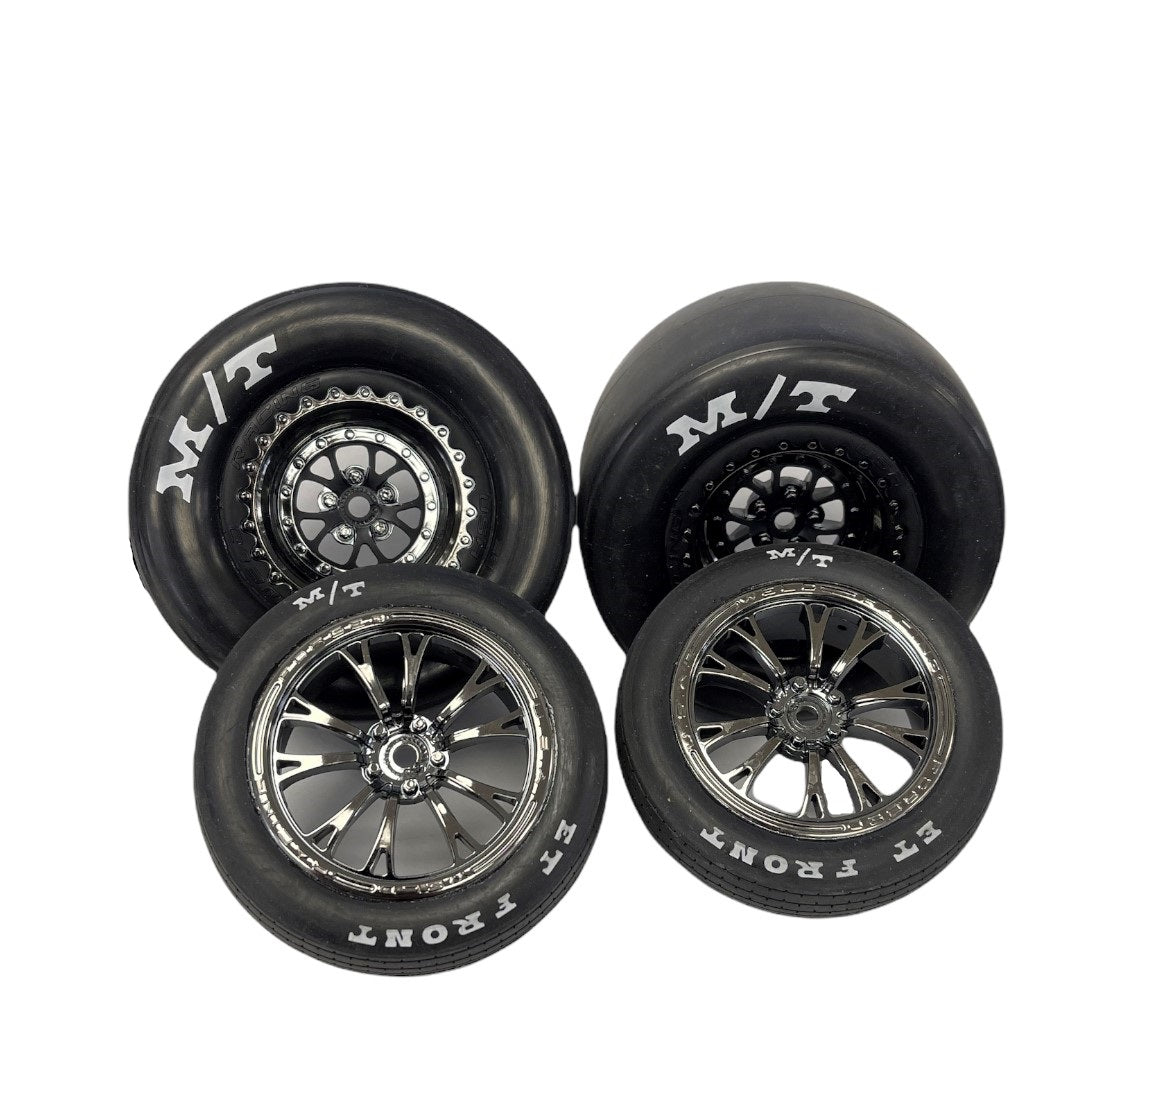 DRAG SLASH PREMOUNTED WHEELS AND TIRES (NEW TAKE OFF PART)